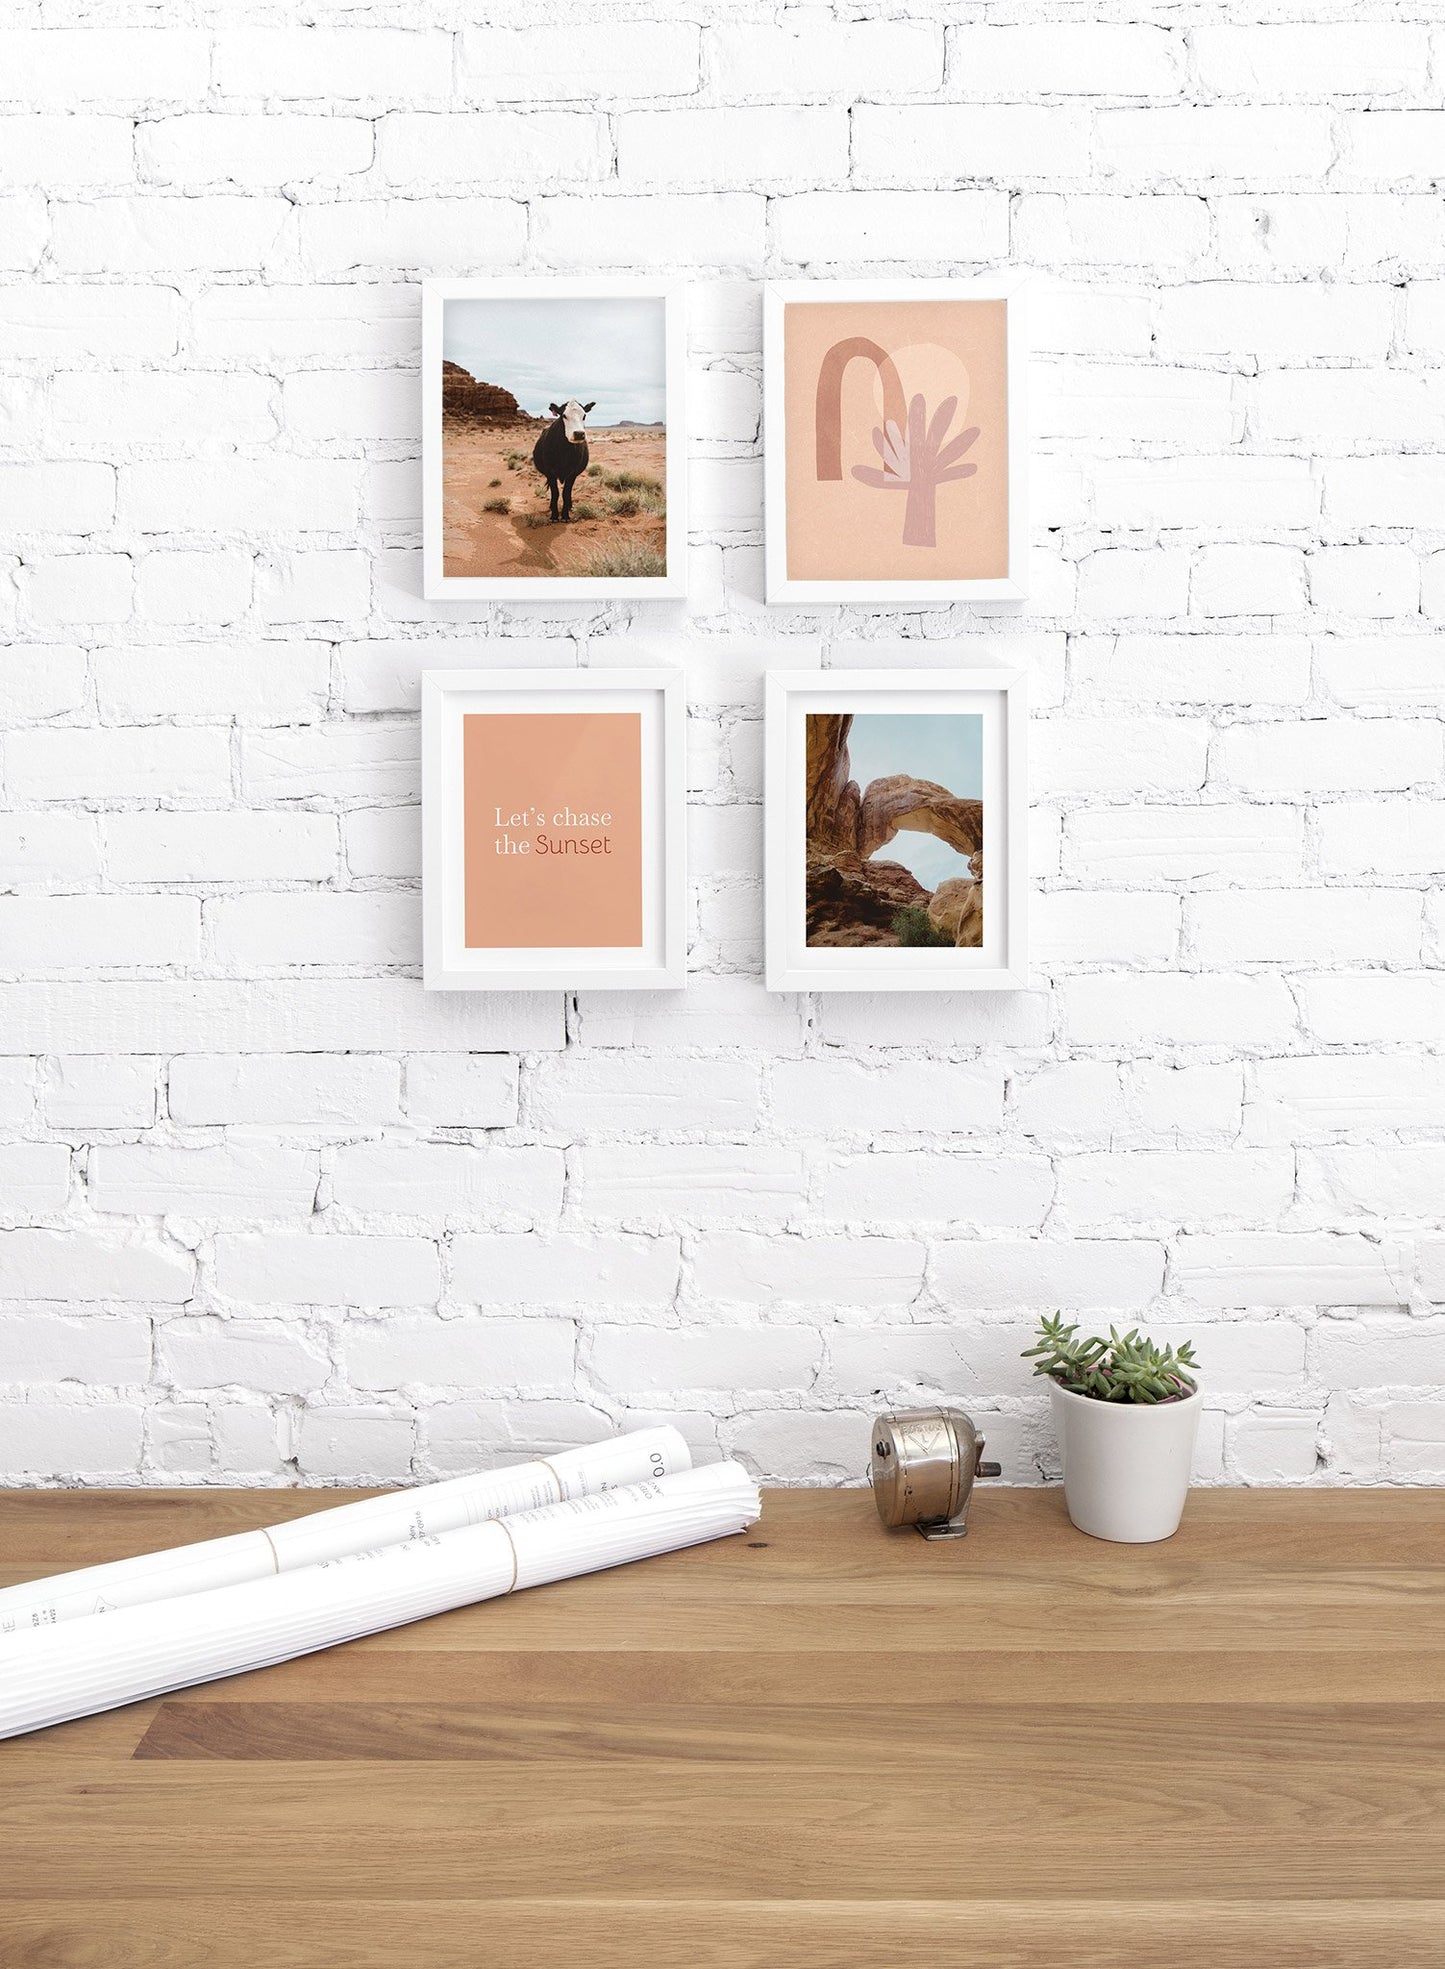 Modern photography poster by Opposite Wall with cow in the desert - Lifestyle Quad - Office Desk